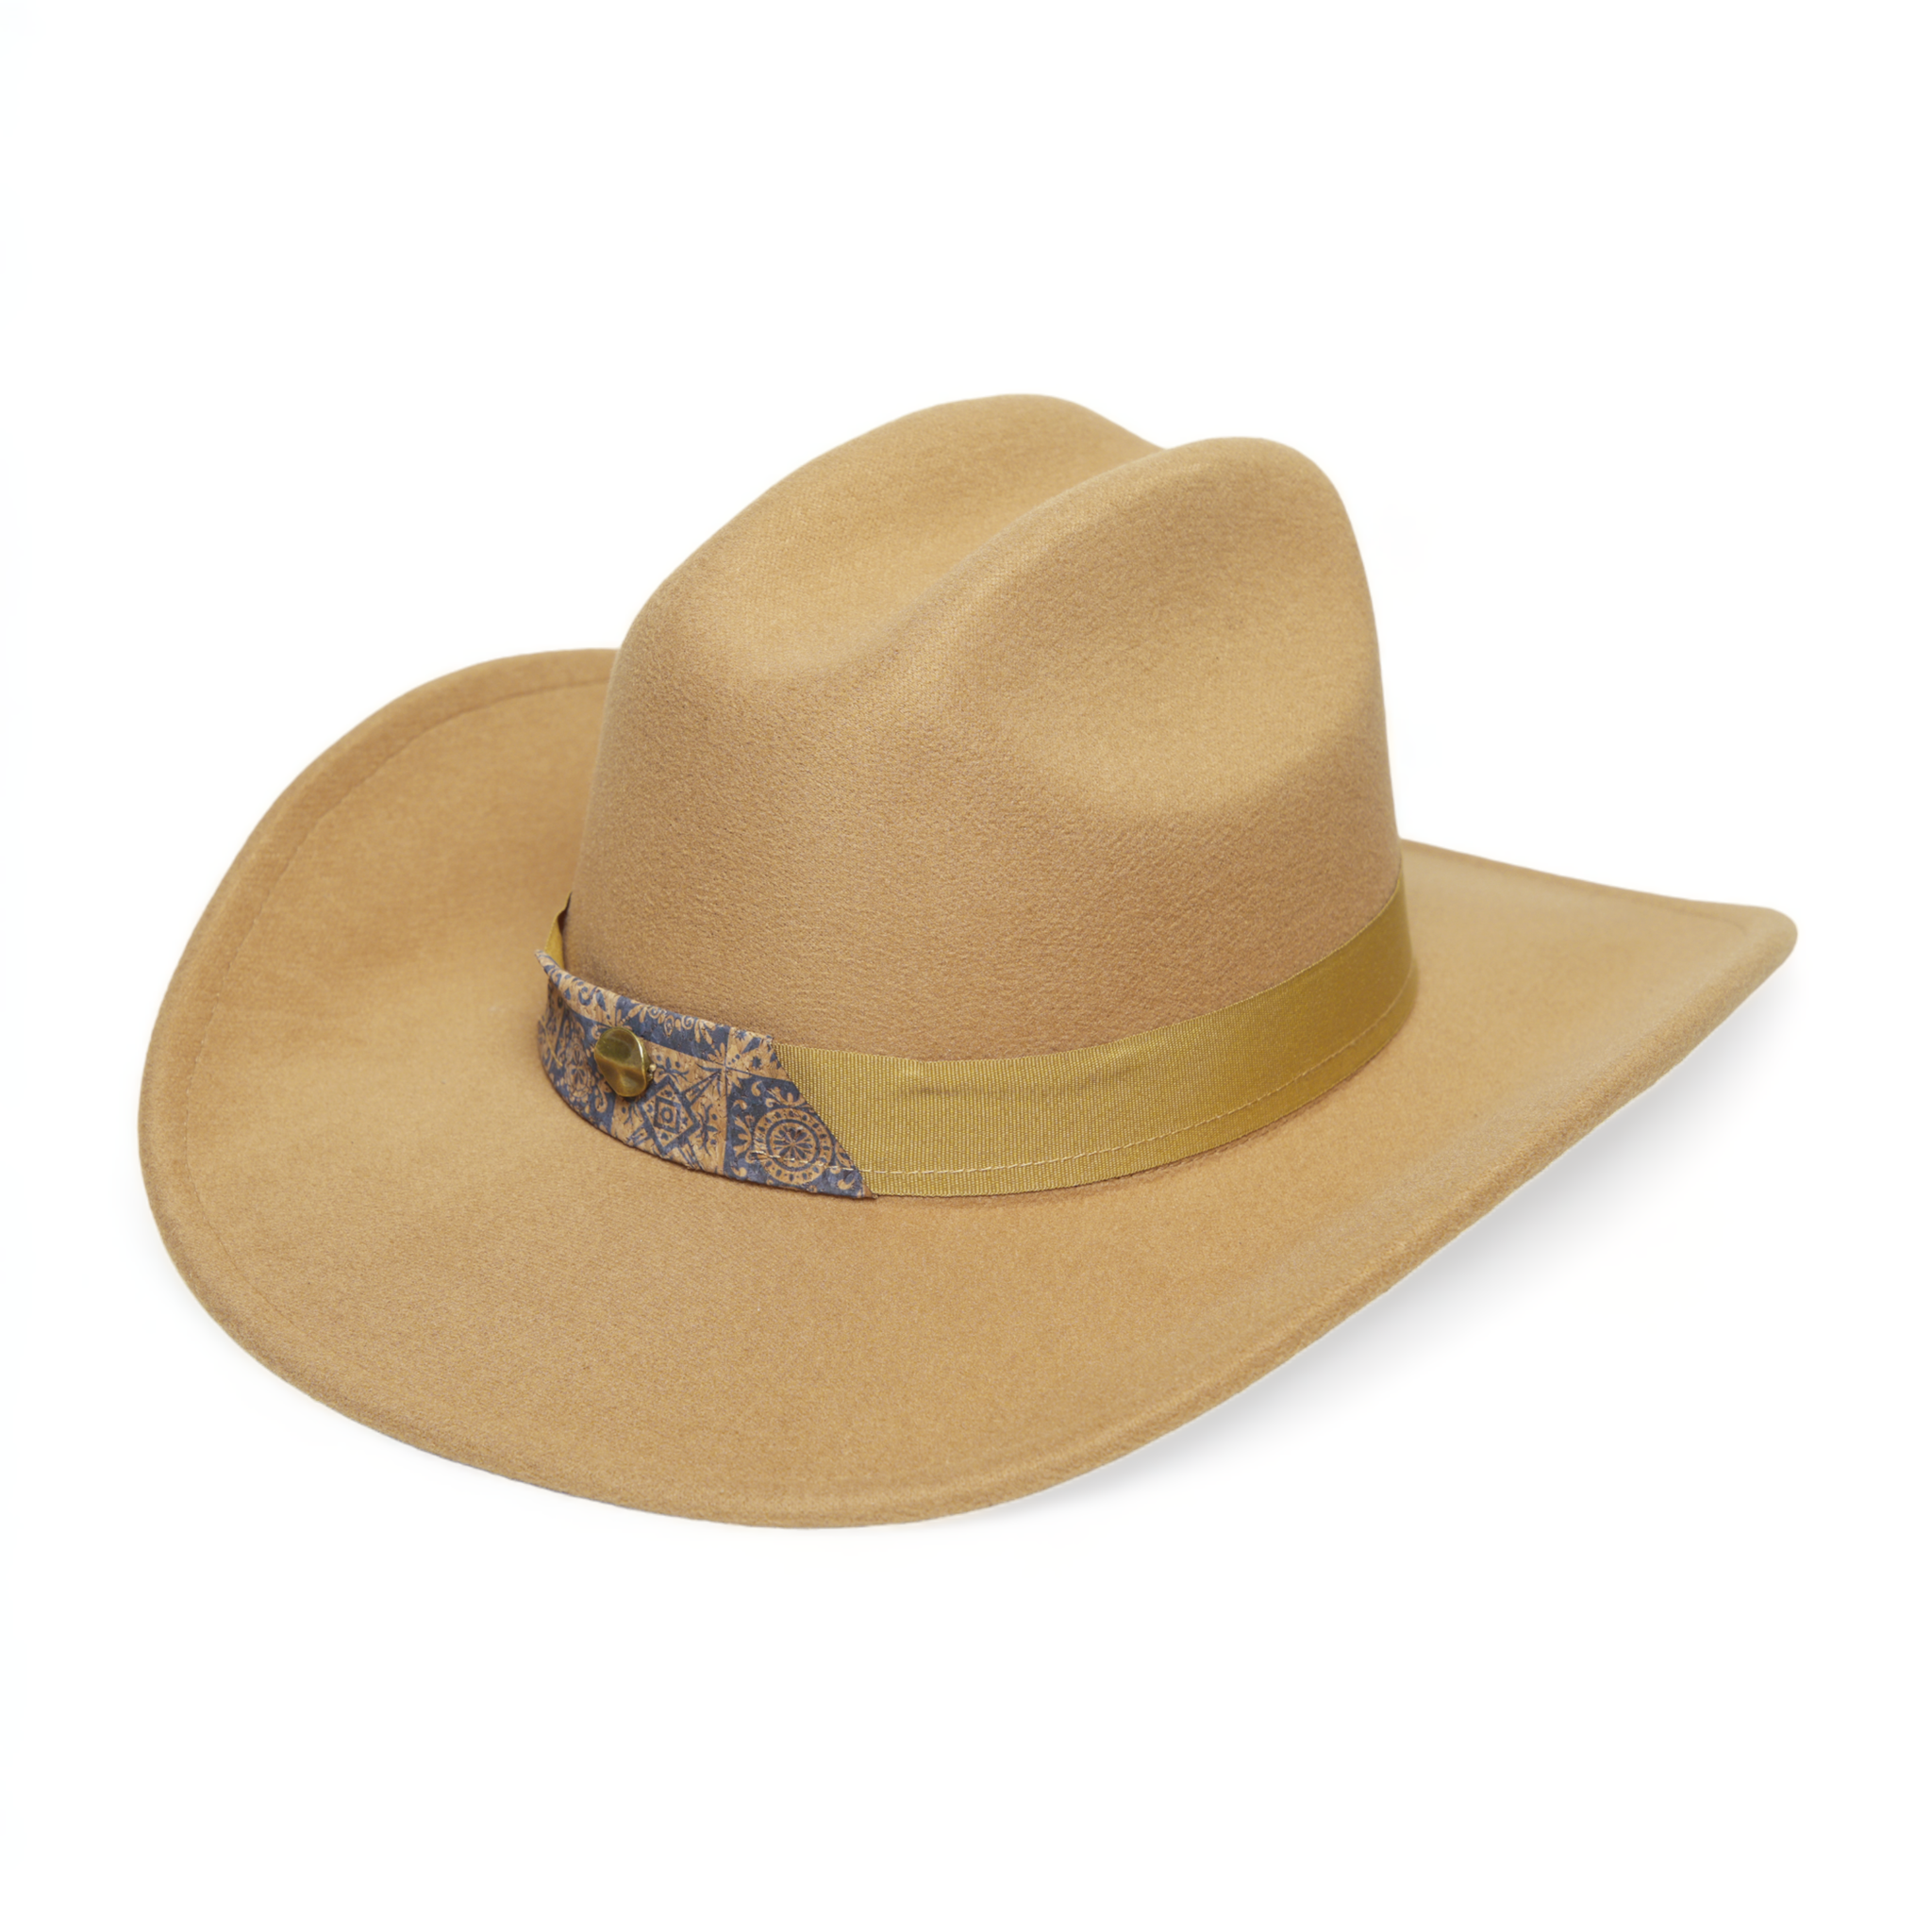 Chokore Cattleman Cowboy Hat with Printed Band (Camel)